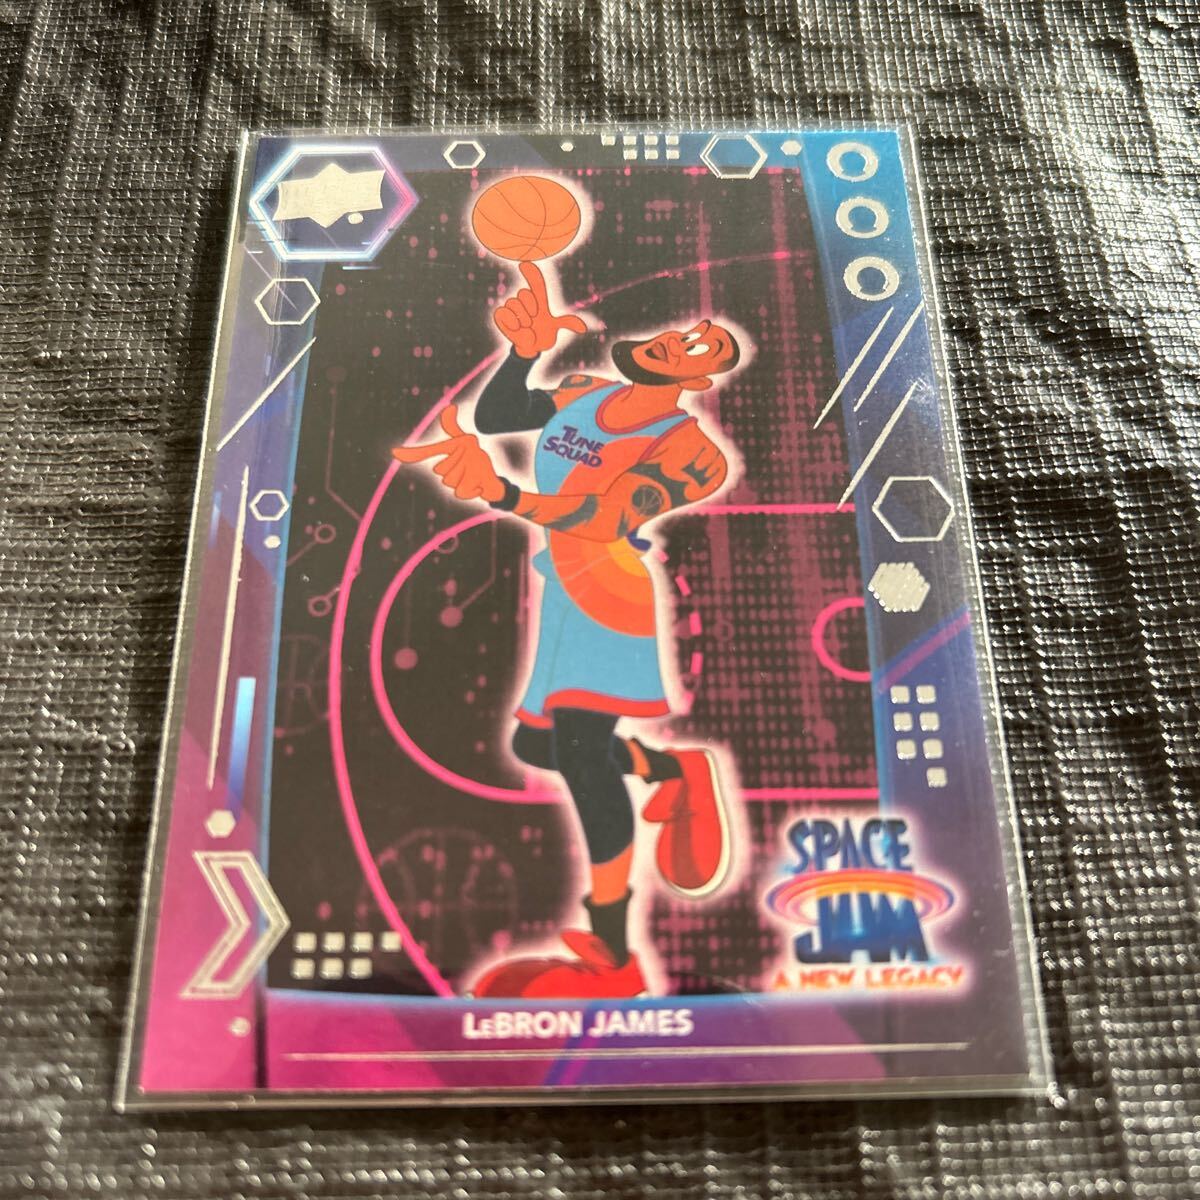 2021 UpperDeck Space Jam A New Legacy Lebron James 他10カード　レブロンジェームス　ロスアンゼルスレイカーズ　　_画像2